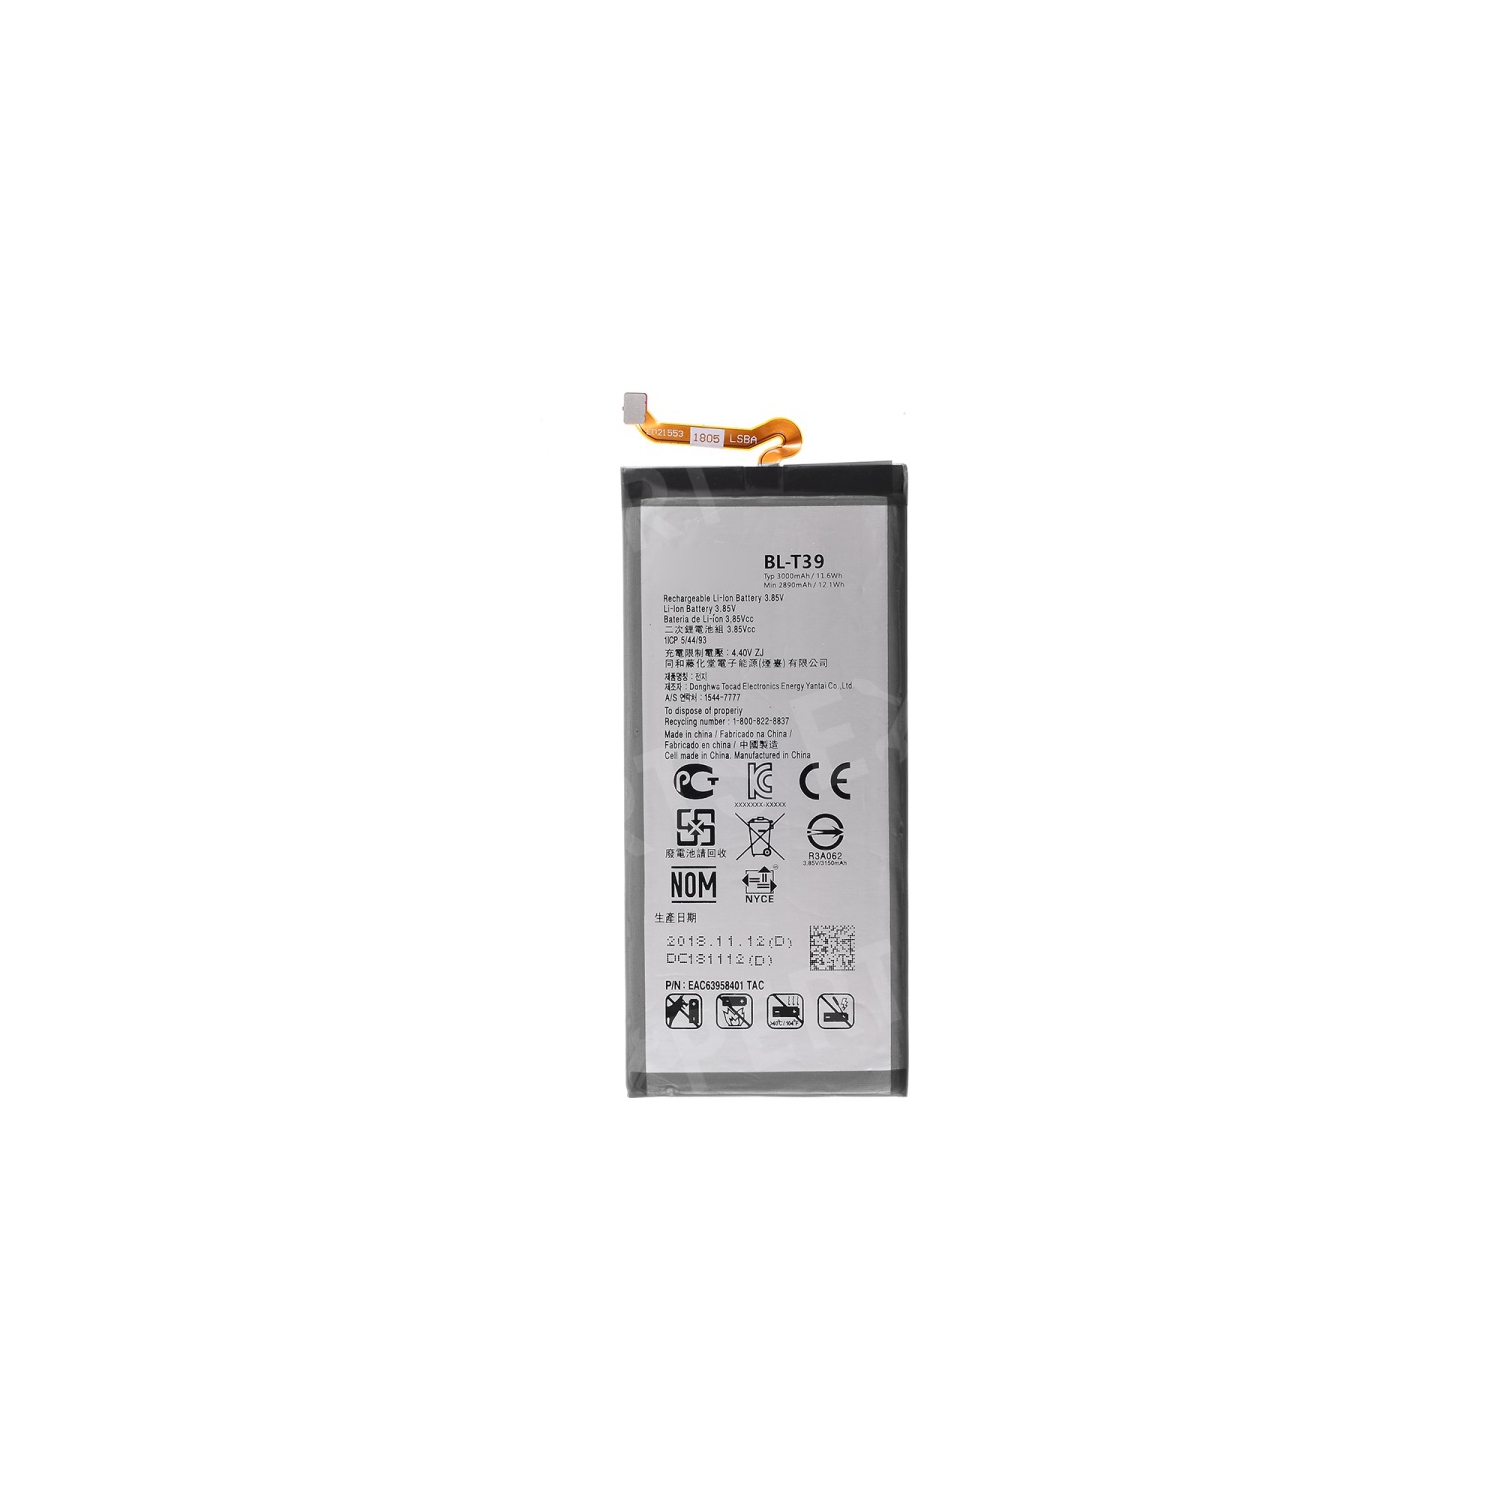 Replacement Battery for LG G7 ThinQ / Q7, BL-T39